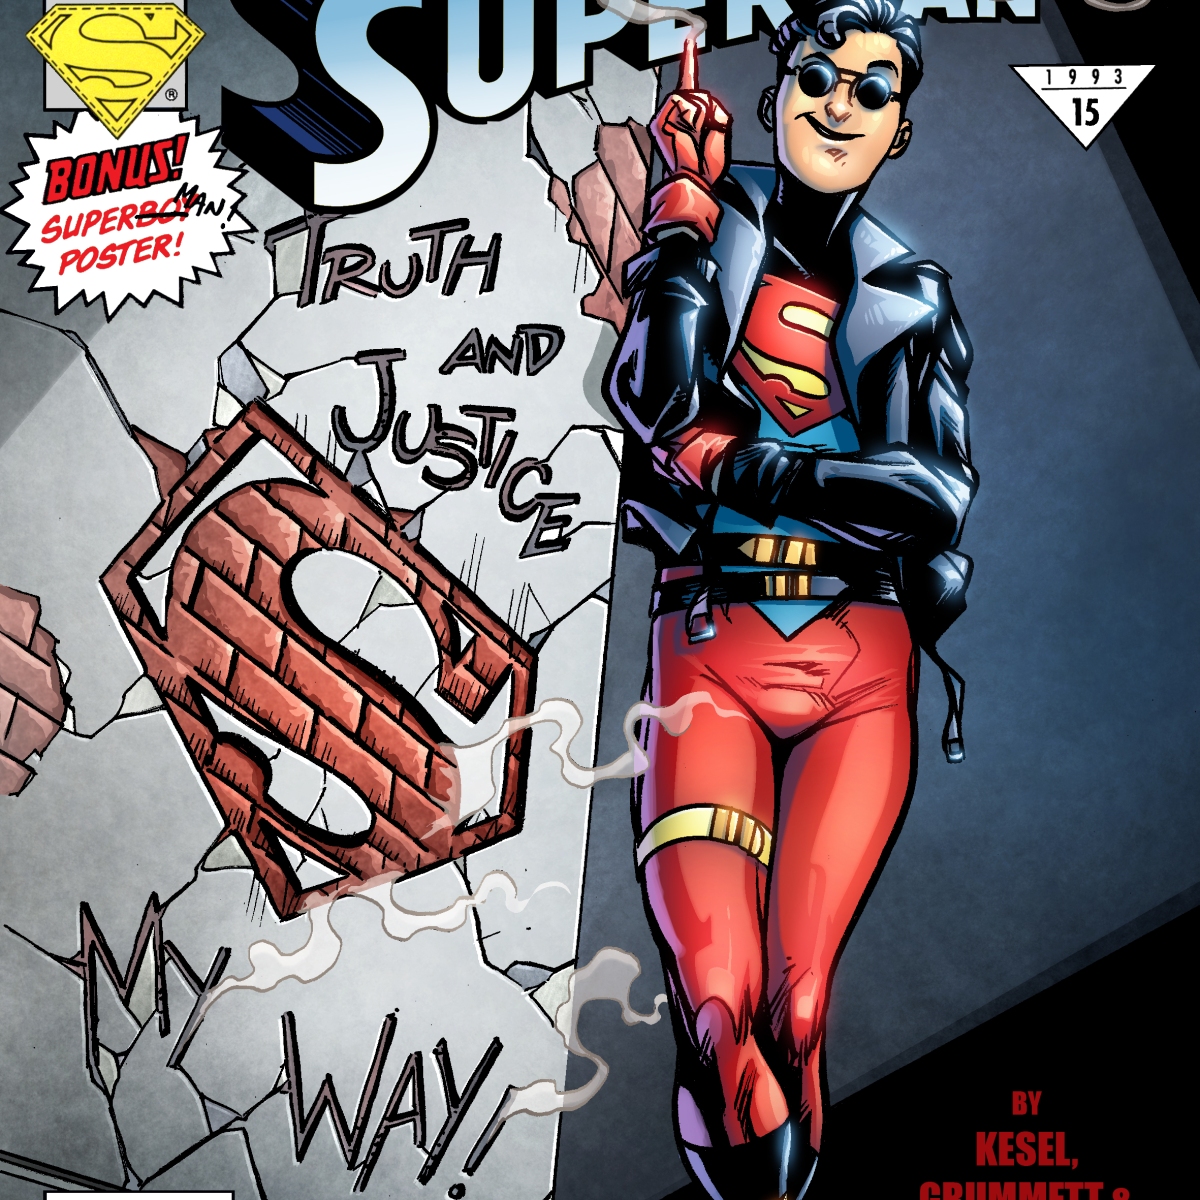 SuperBoy anniversary – Comic cover remake